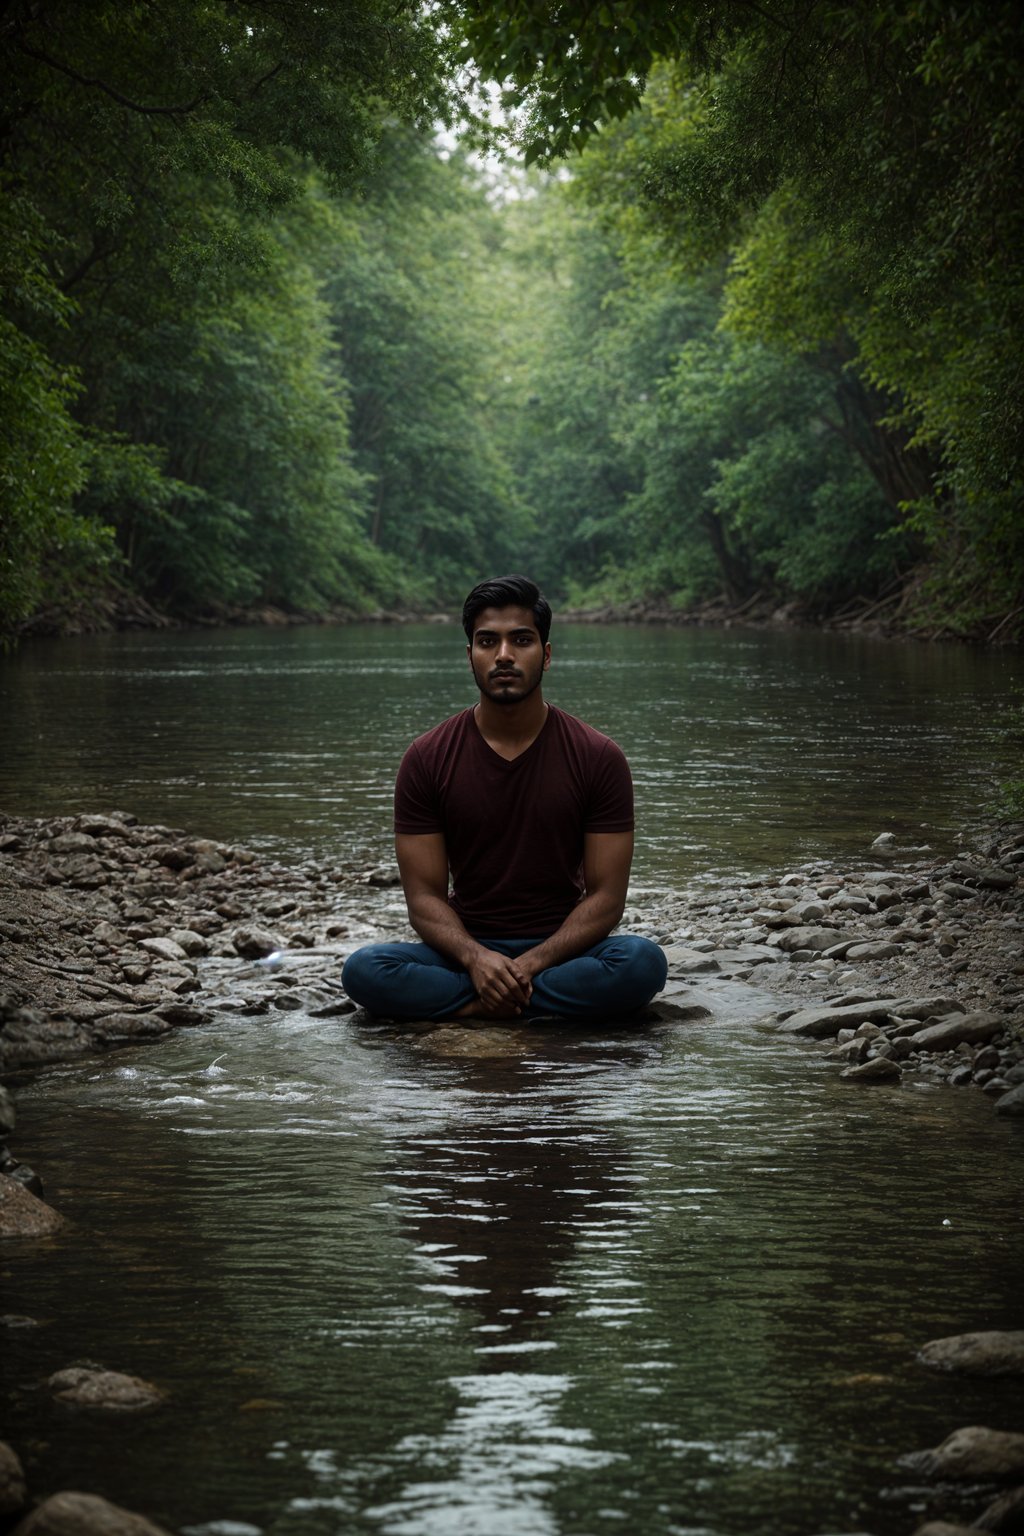 man in deep contemplation, sitting by a tranquil lake or flowing river, capturing the introspective and reflective nature of spirituality